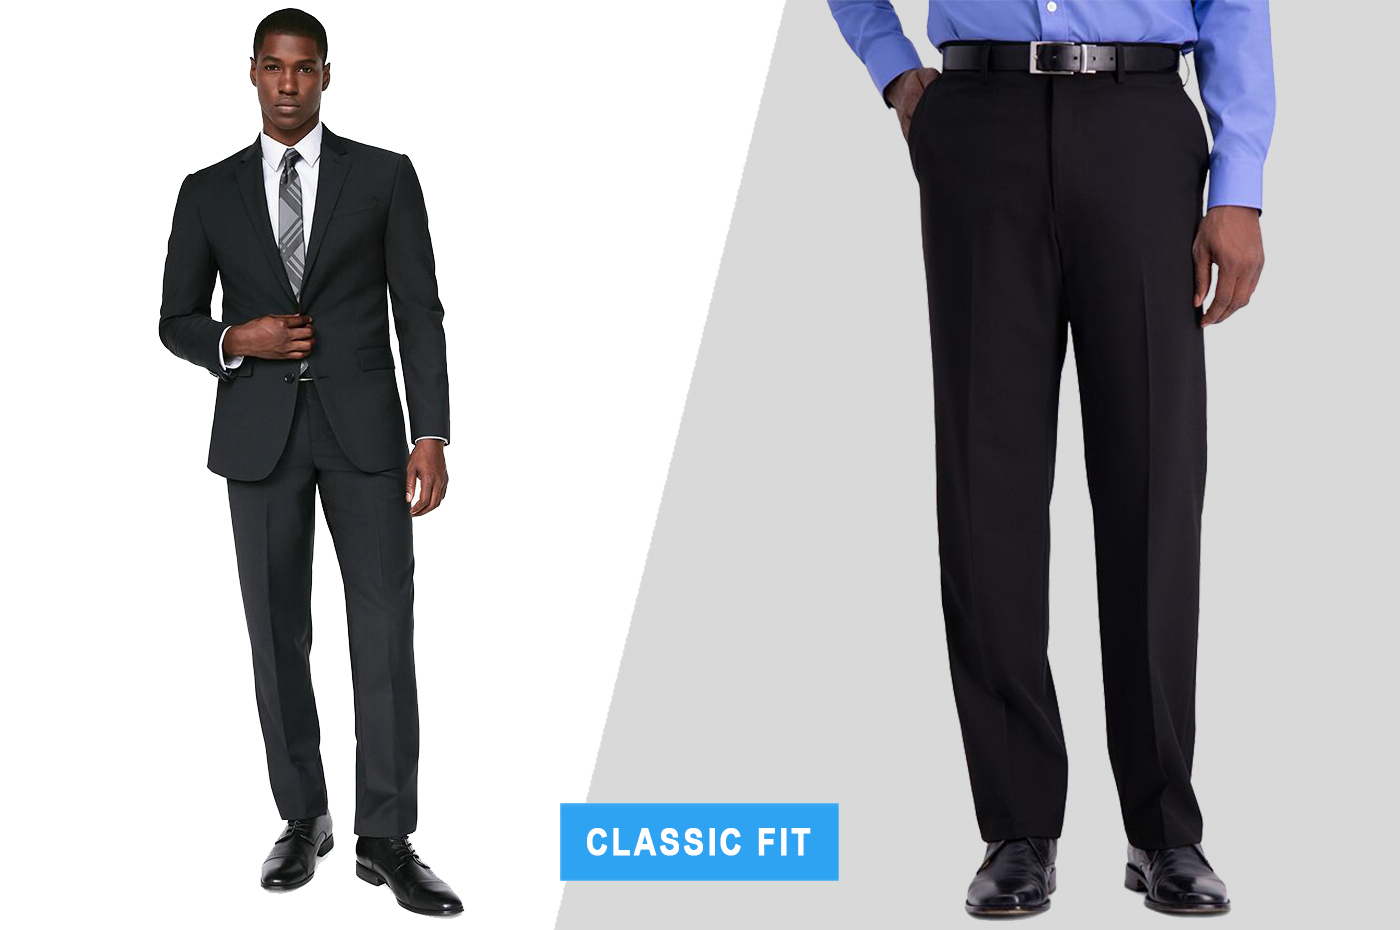 Classic Fit Vs. Regular Fit for Men - What You Need to Know